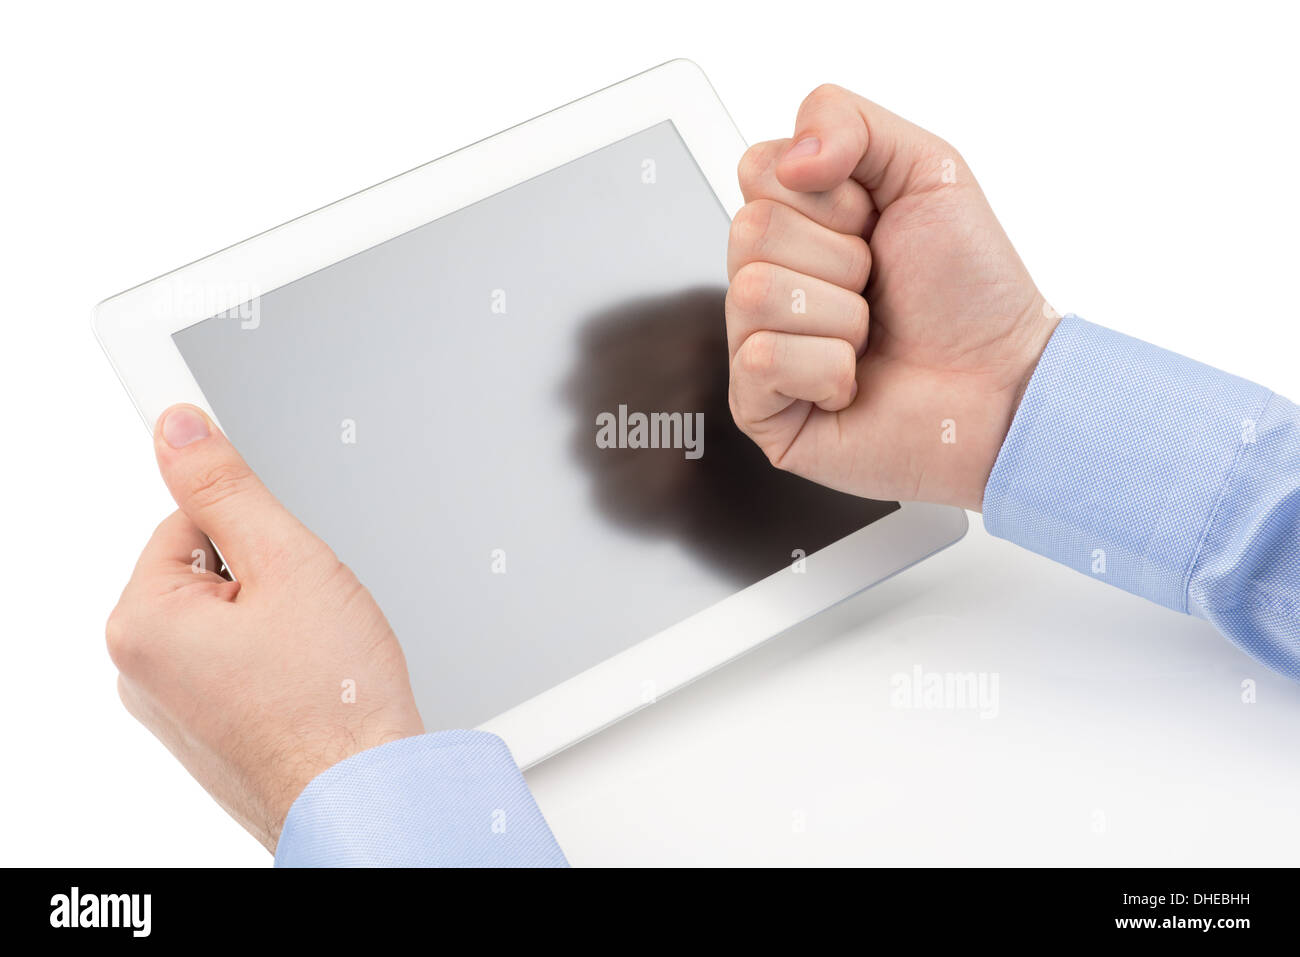 Mans hands holding a tablet computer and threatening by a fist at the screenn on a white background. Stock Photo